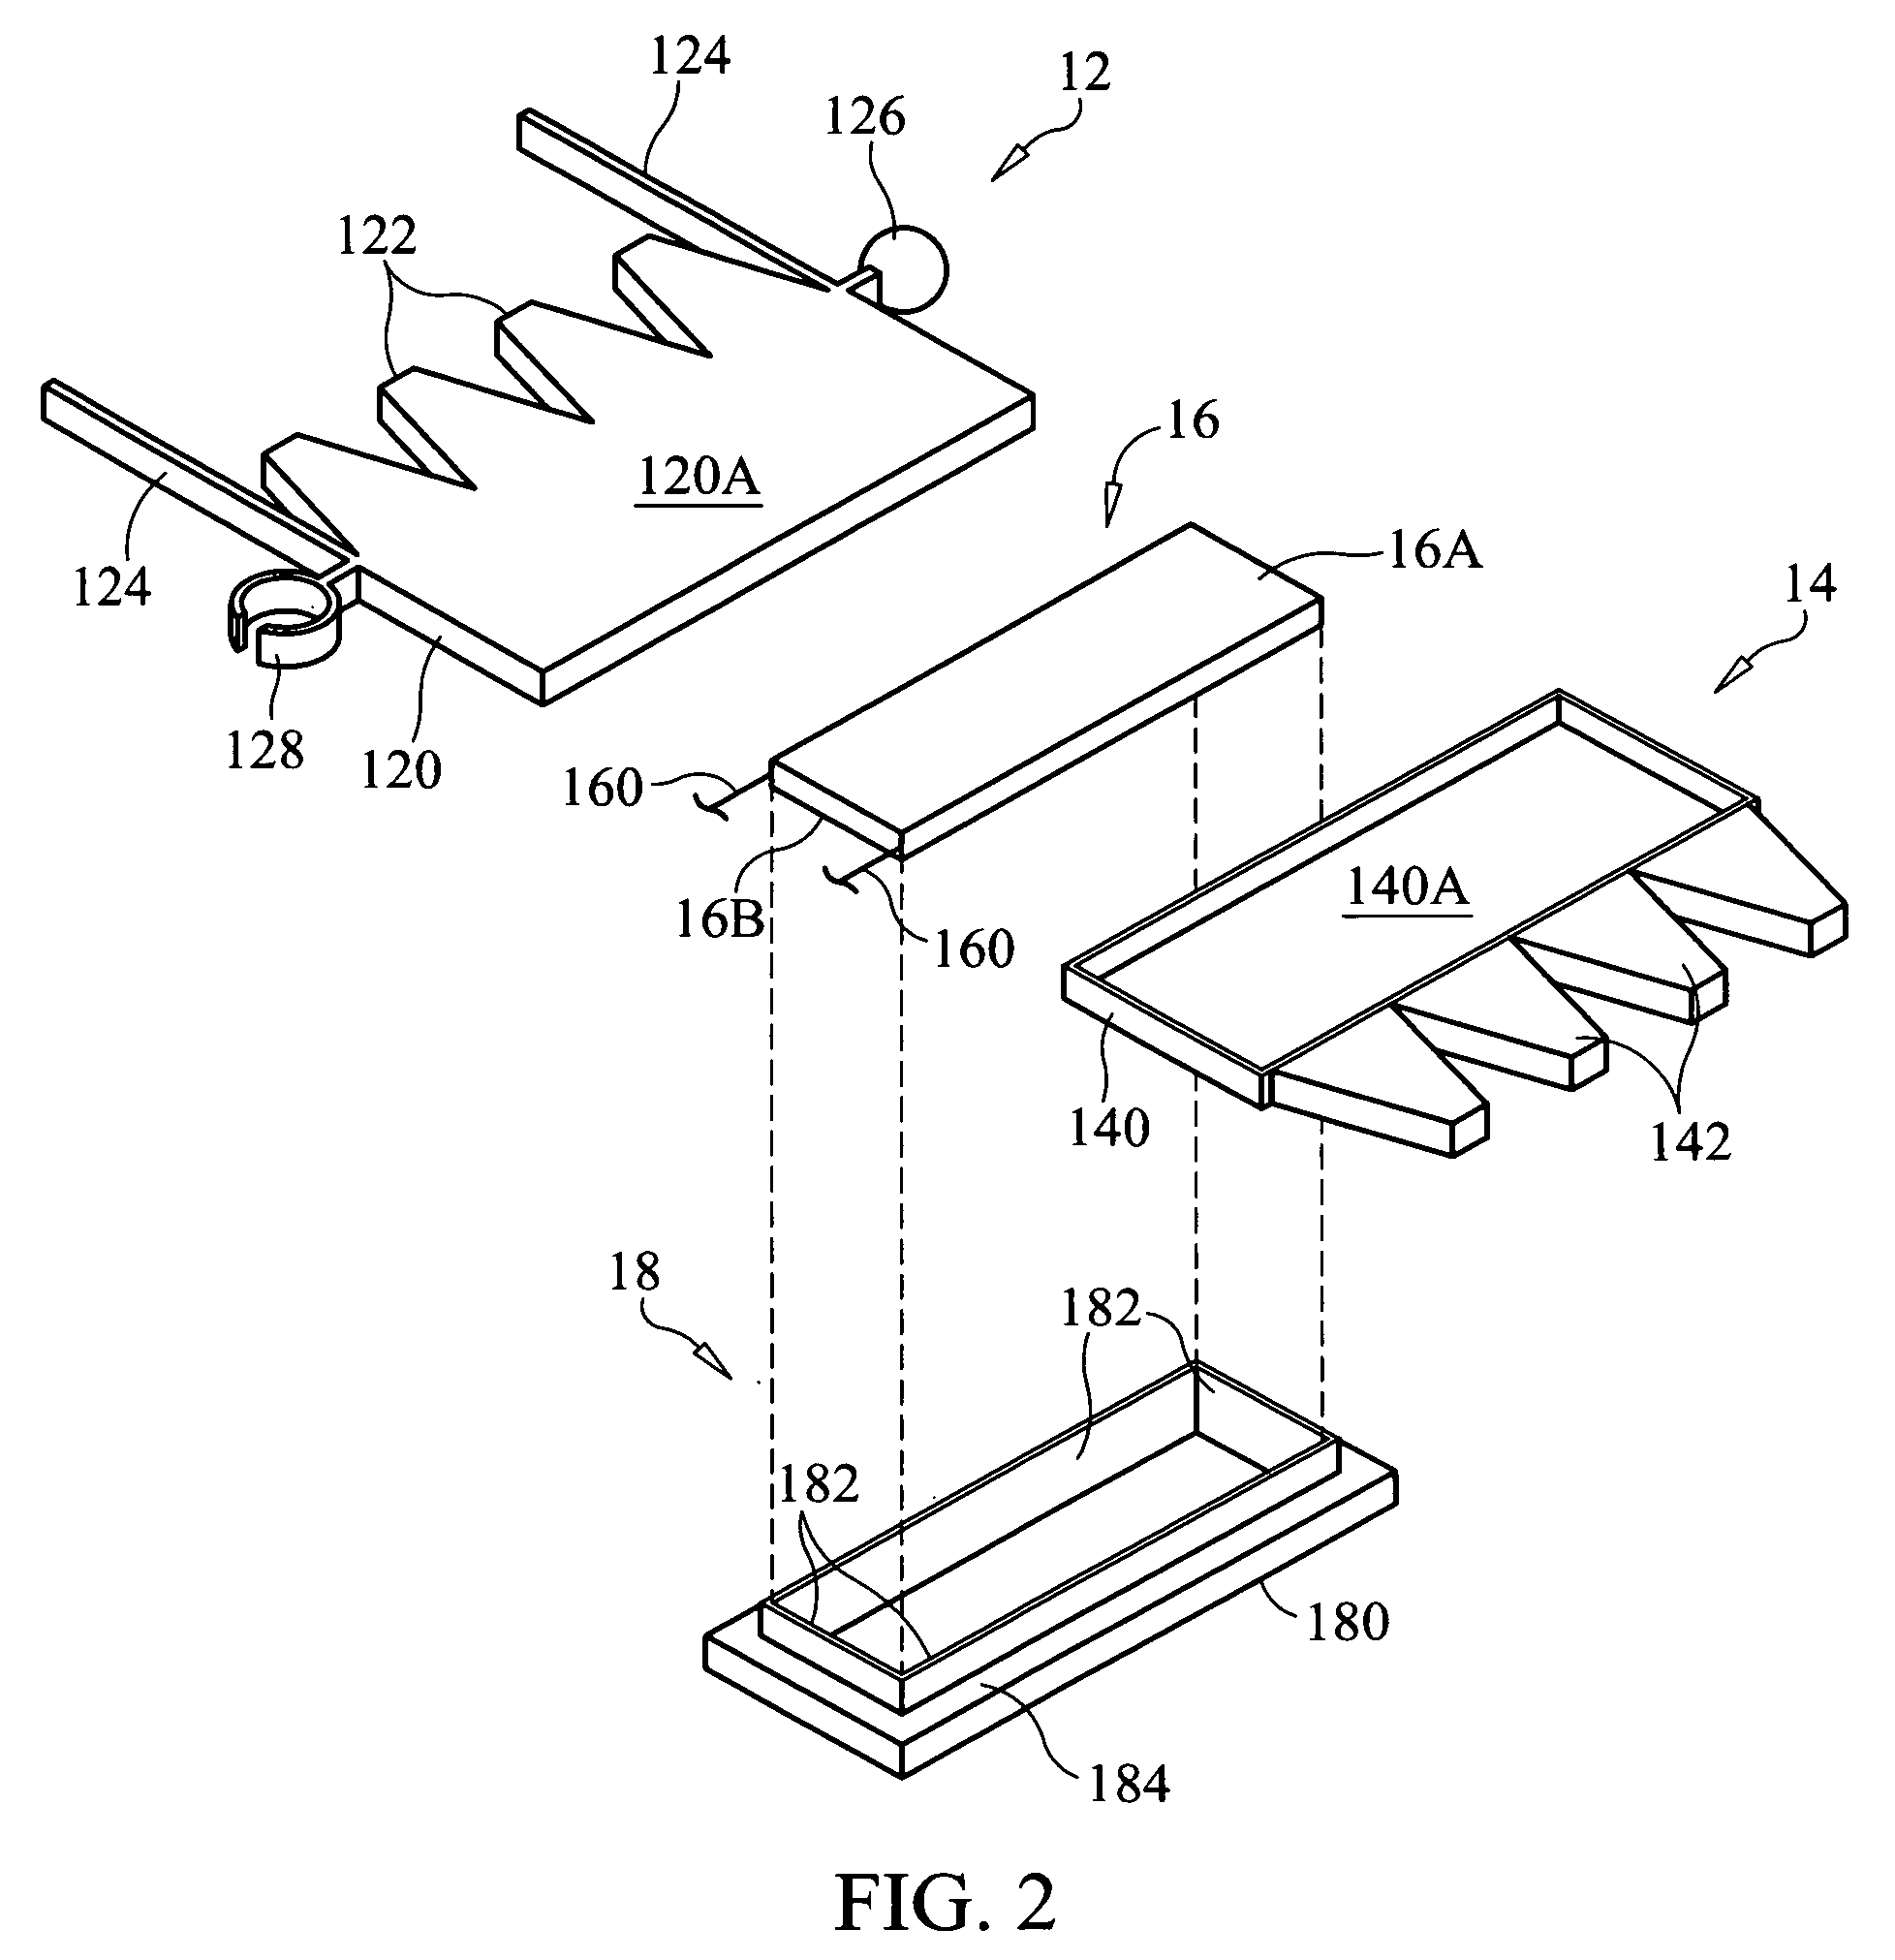 Thermal effluent to electric energy harvesting system